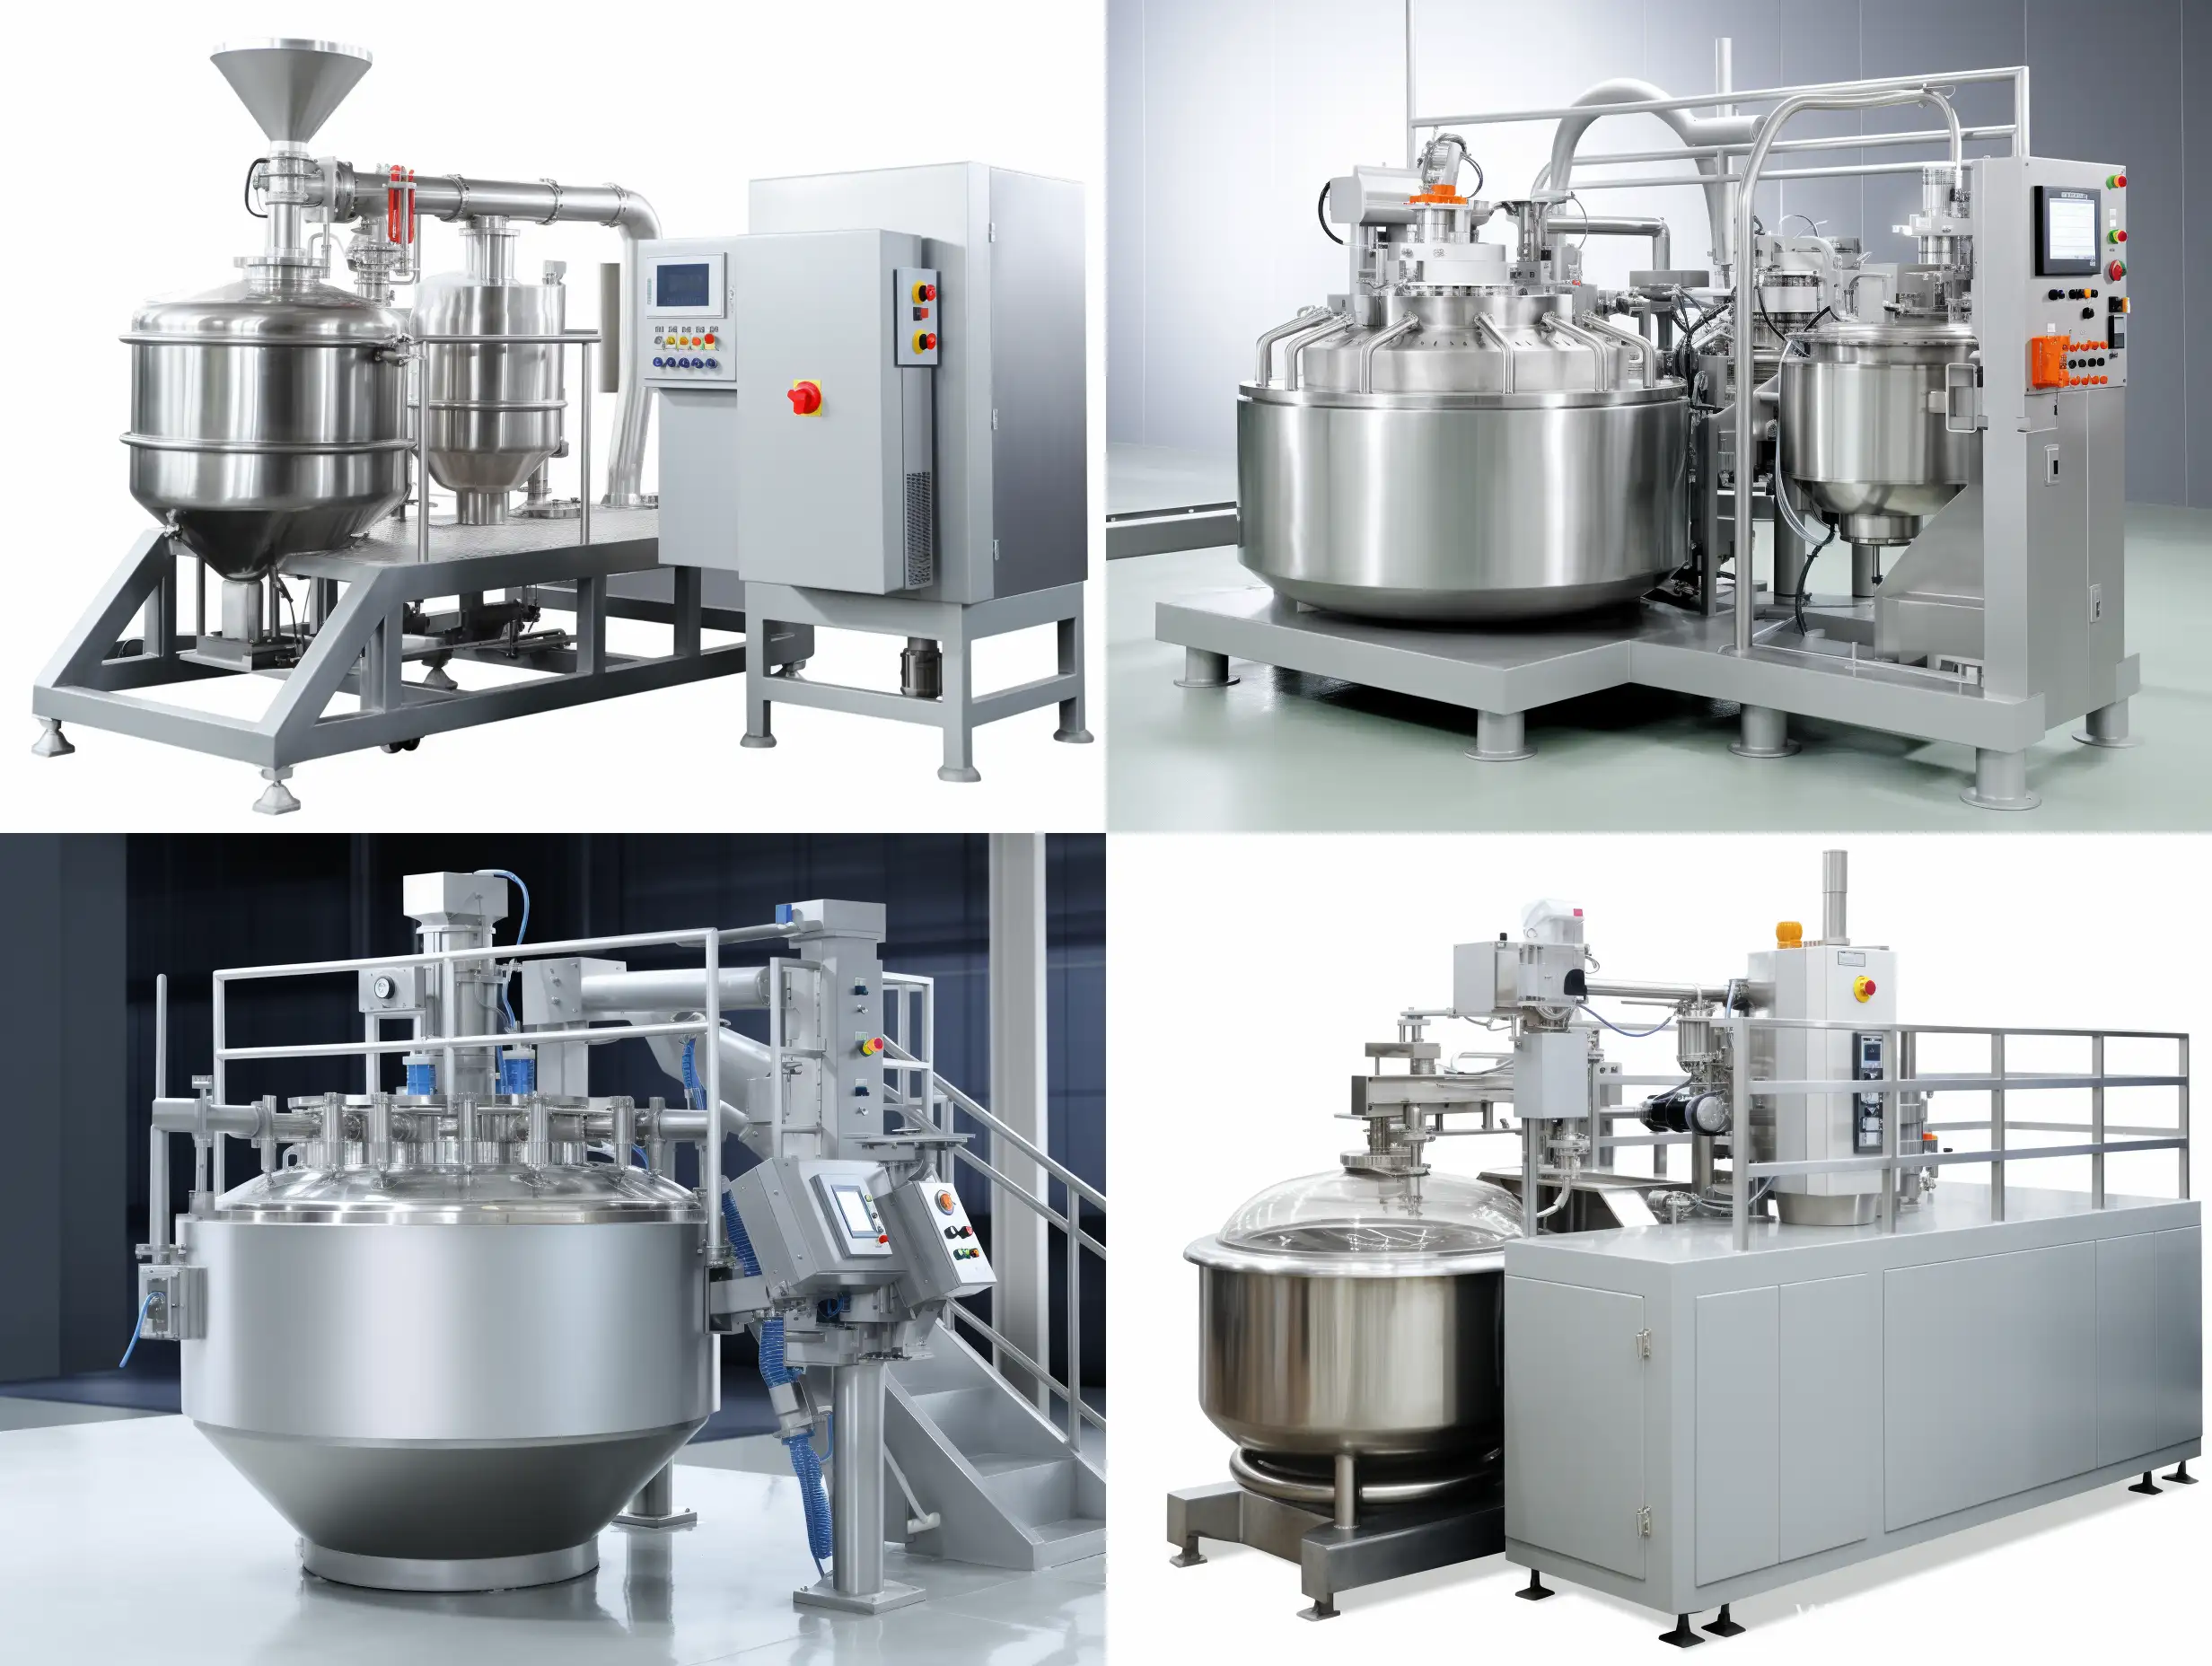 HighSpeed-Stirrers-and-Mixers-for-Efficient-Production